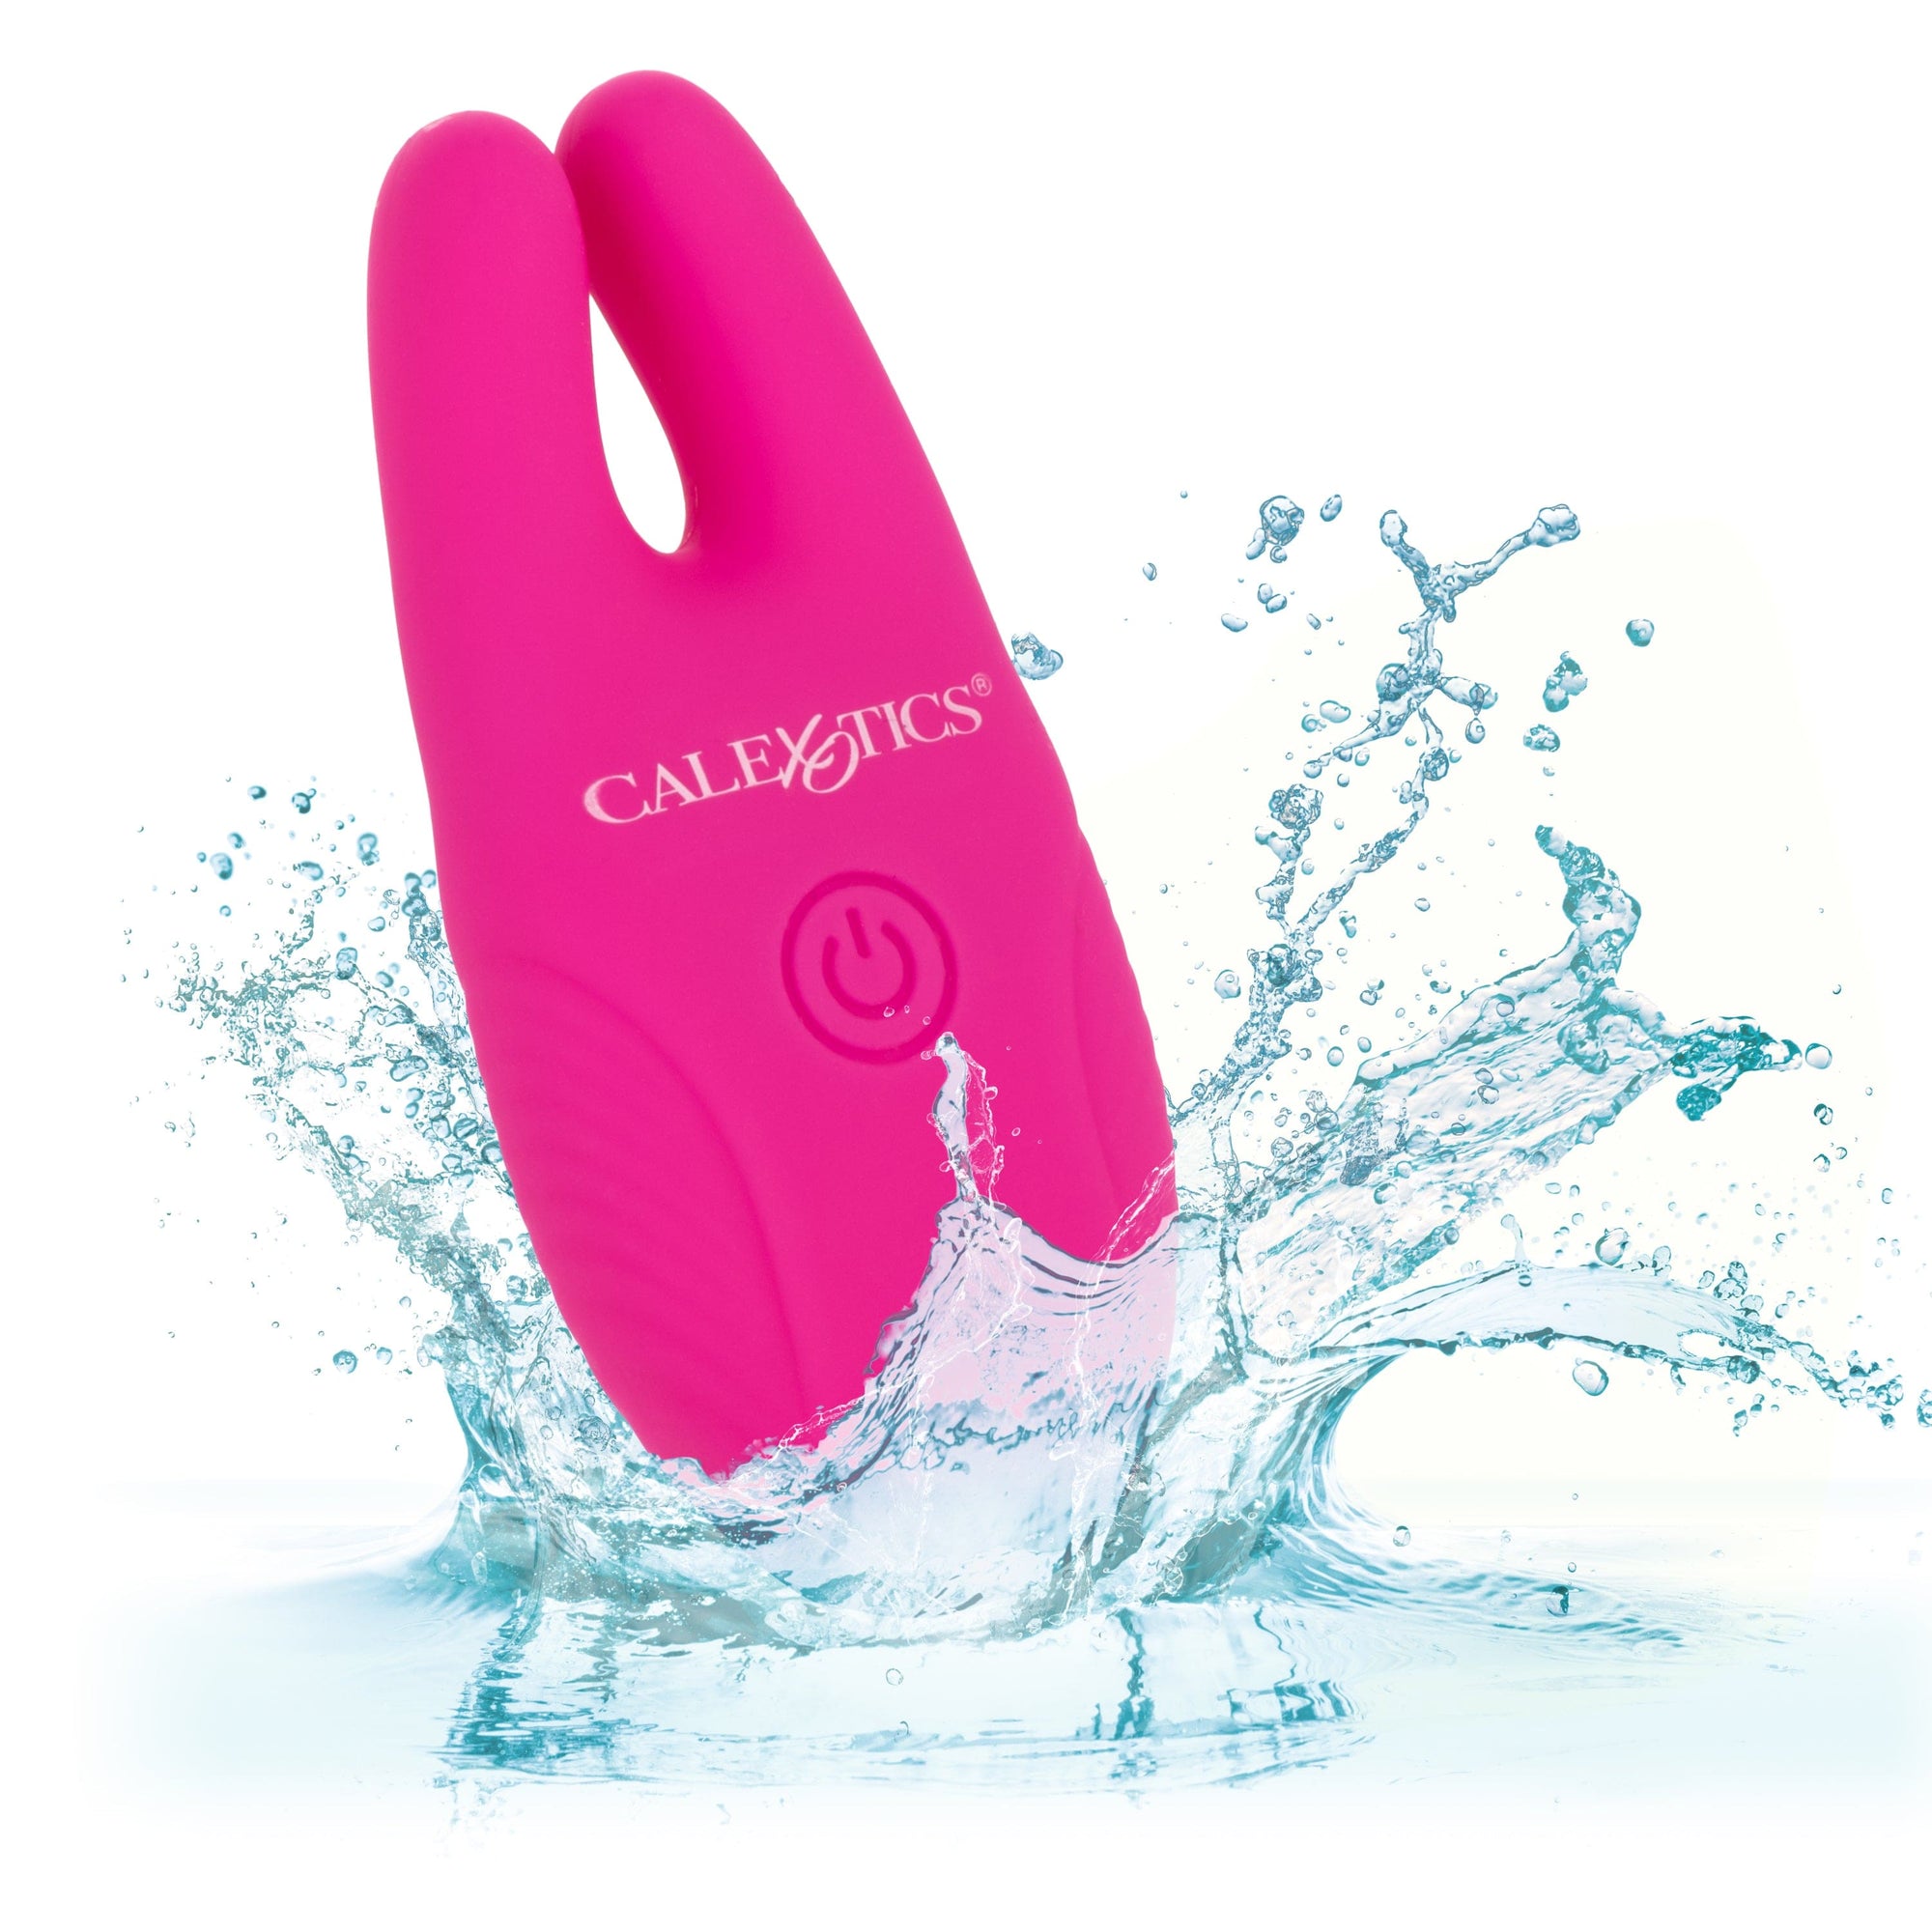 California Exotics - Silicone Remote Control Vibrating Nipple Clamps (Pink) Nipple Clamps (Vibration) Rechargeable 716770099174 CherryAffairs